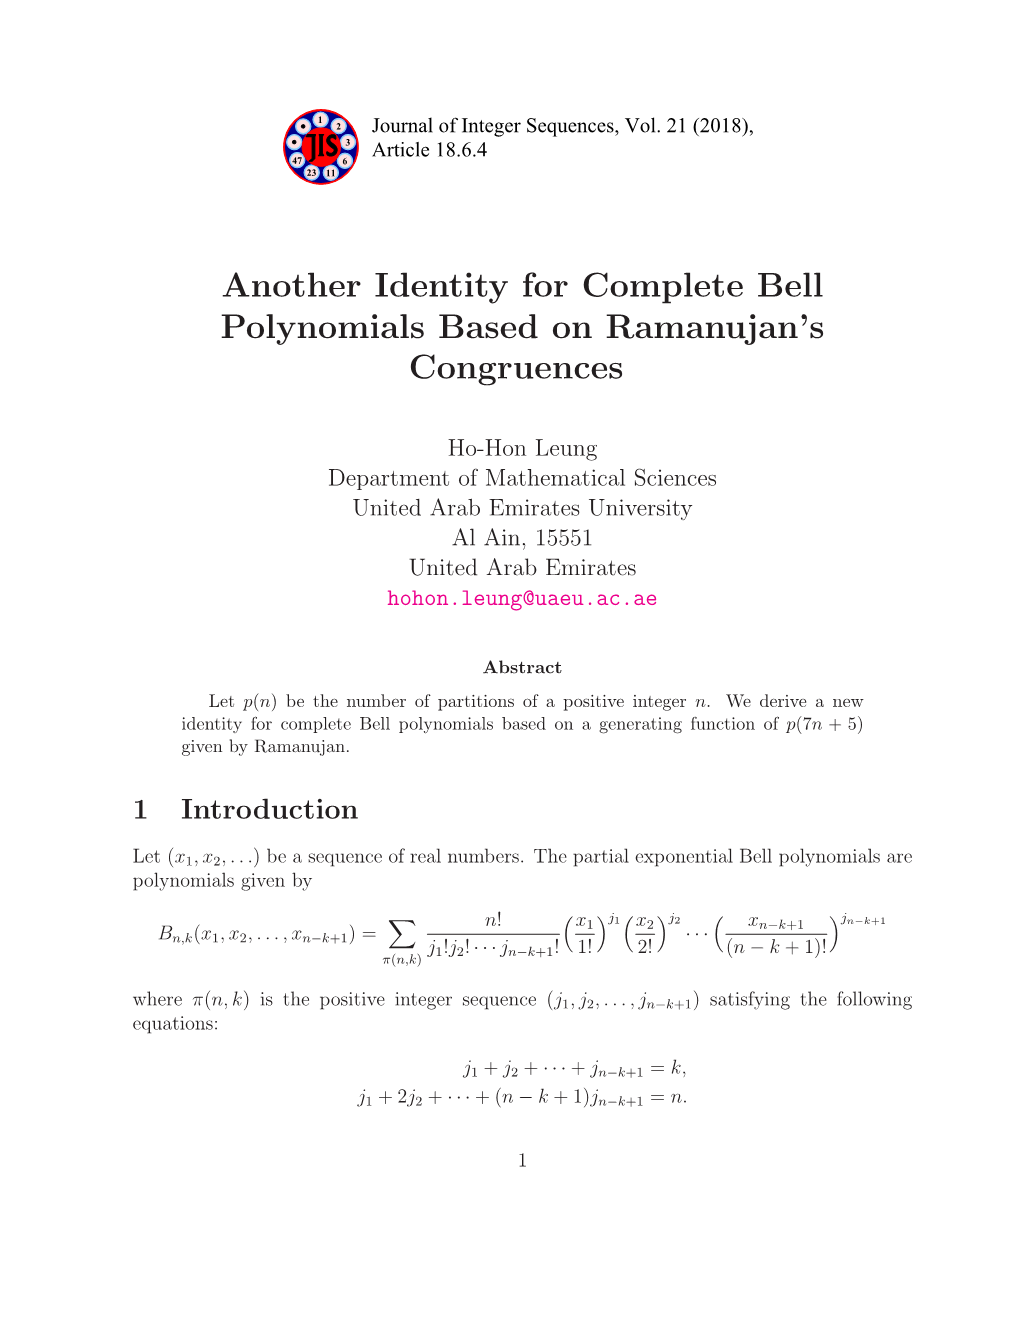 Another Identity for Complete Bell Polynomials Based on Ramanujan’S Congruences